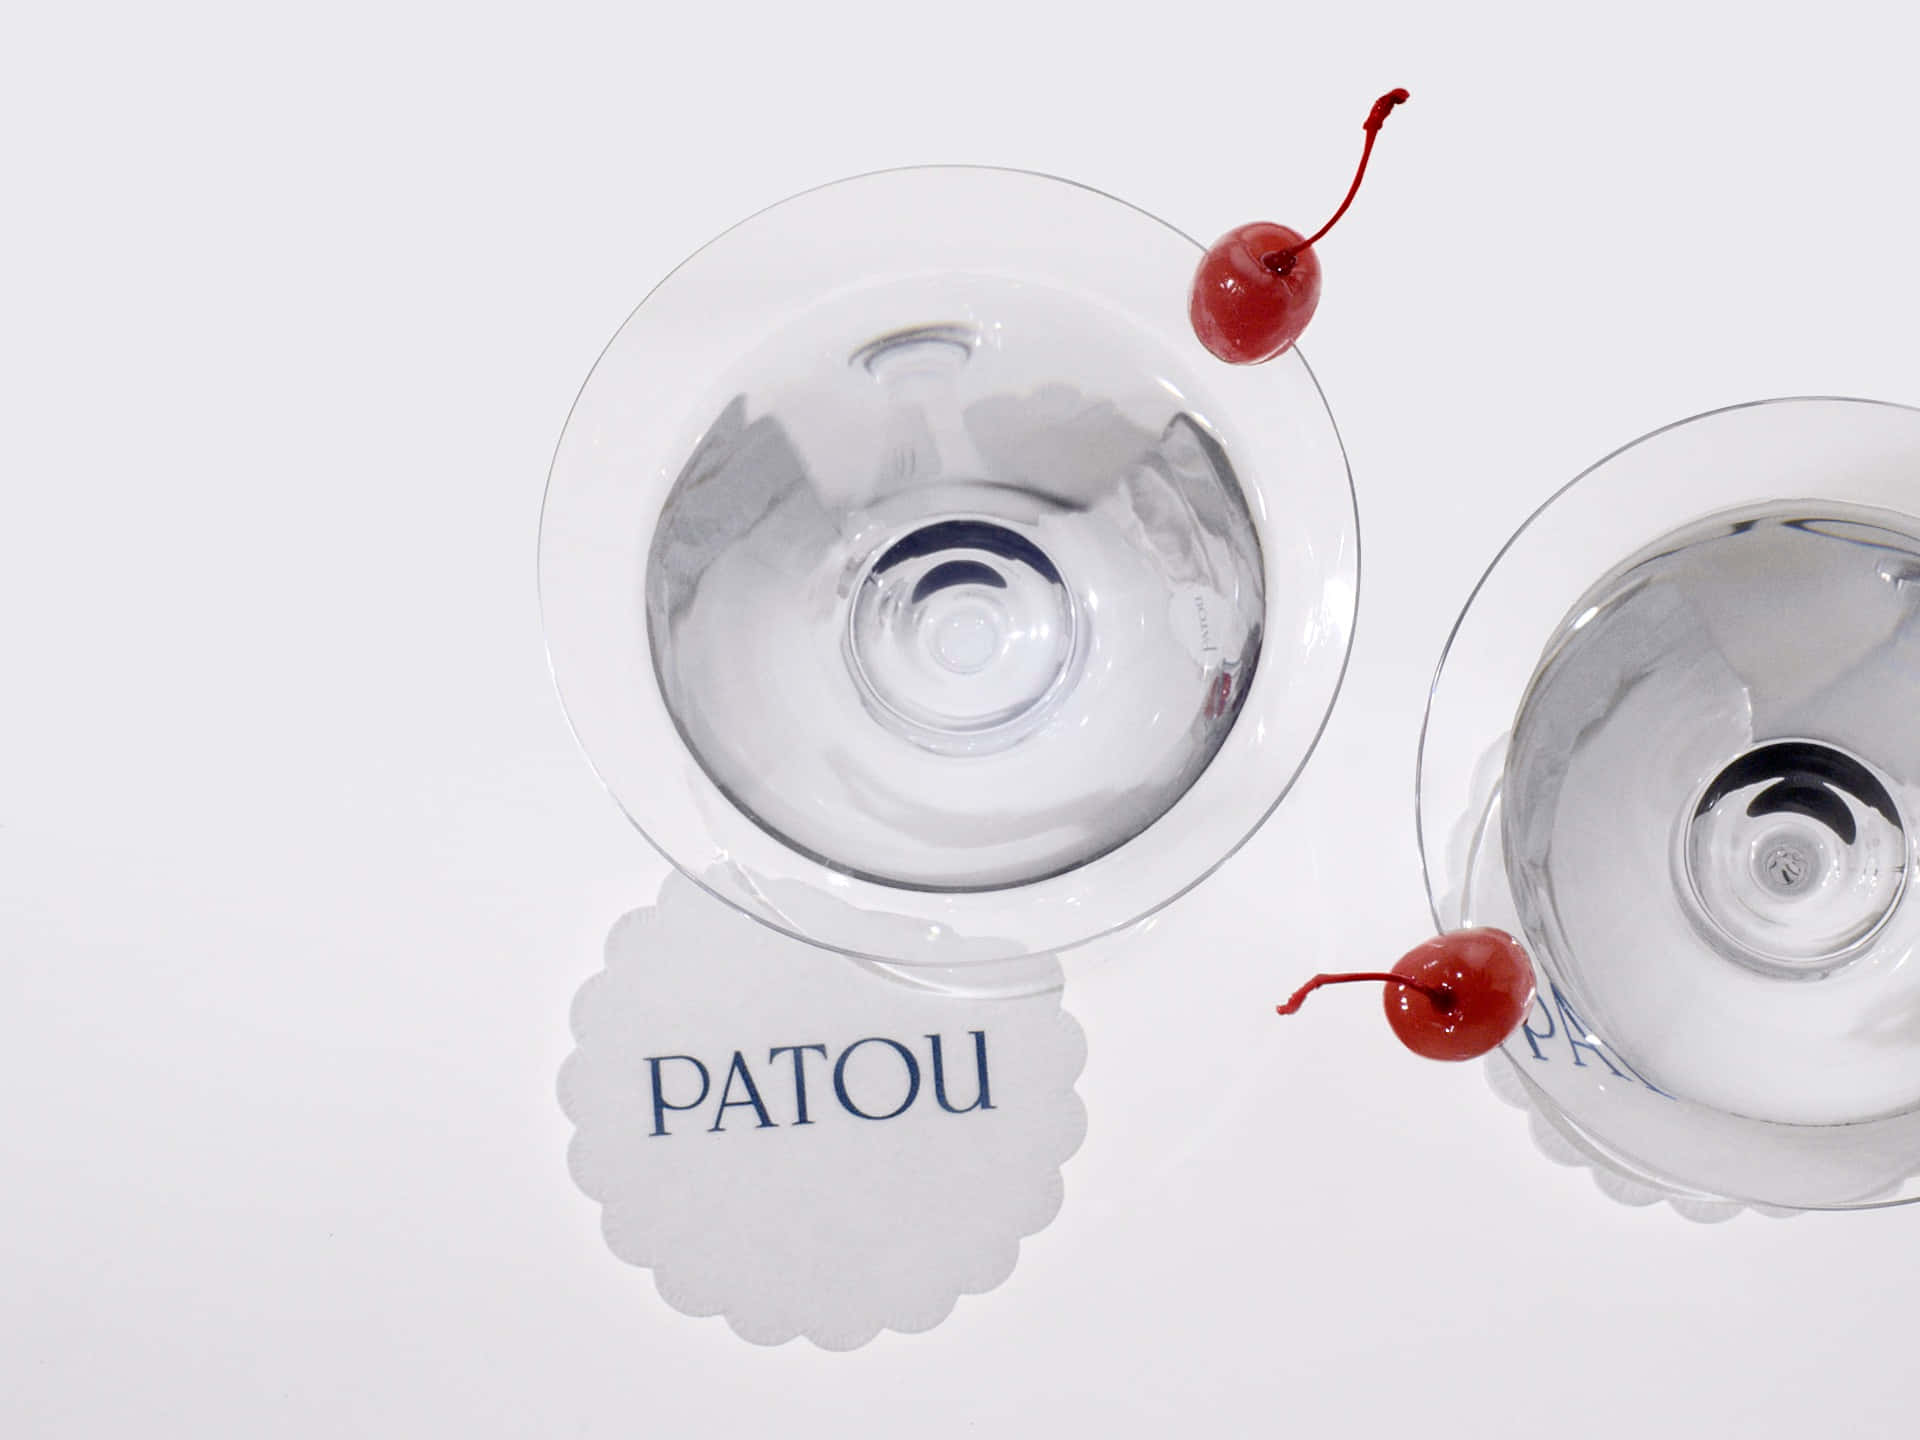 Cocktail Glasses With Patou Logo On Doily Wallpaper